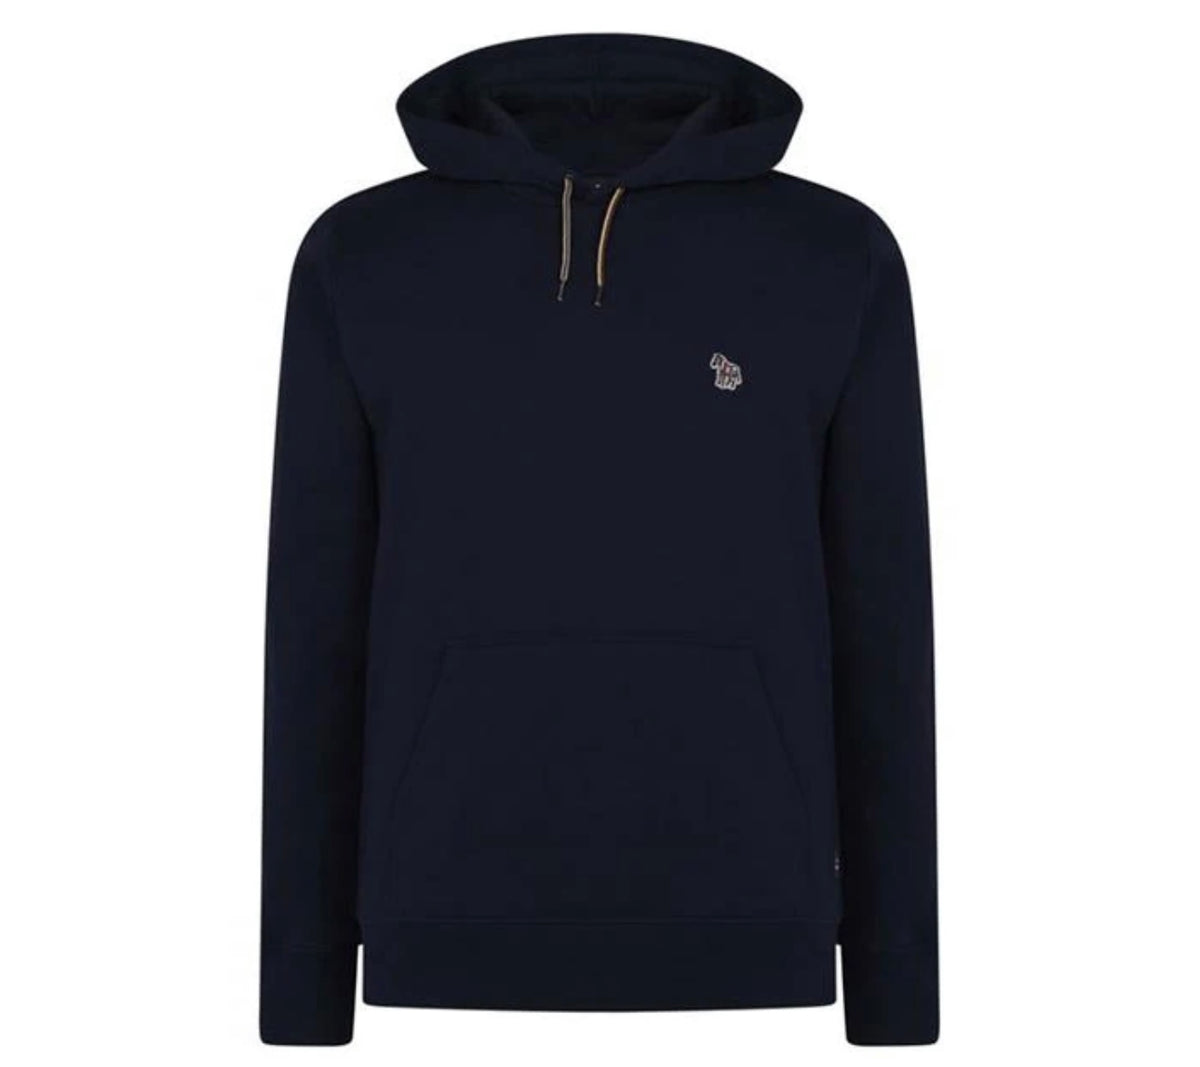 PAUL SMITH EMBROIDERED ZEBRA OTTH HOODIE NAVY BLUE